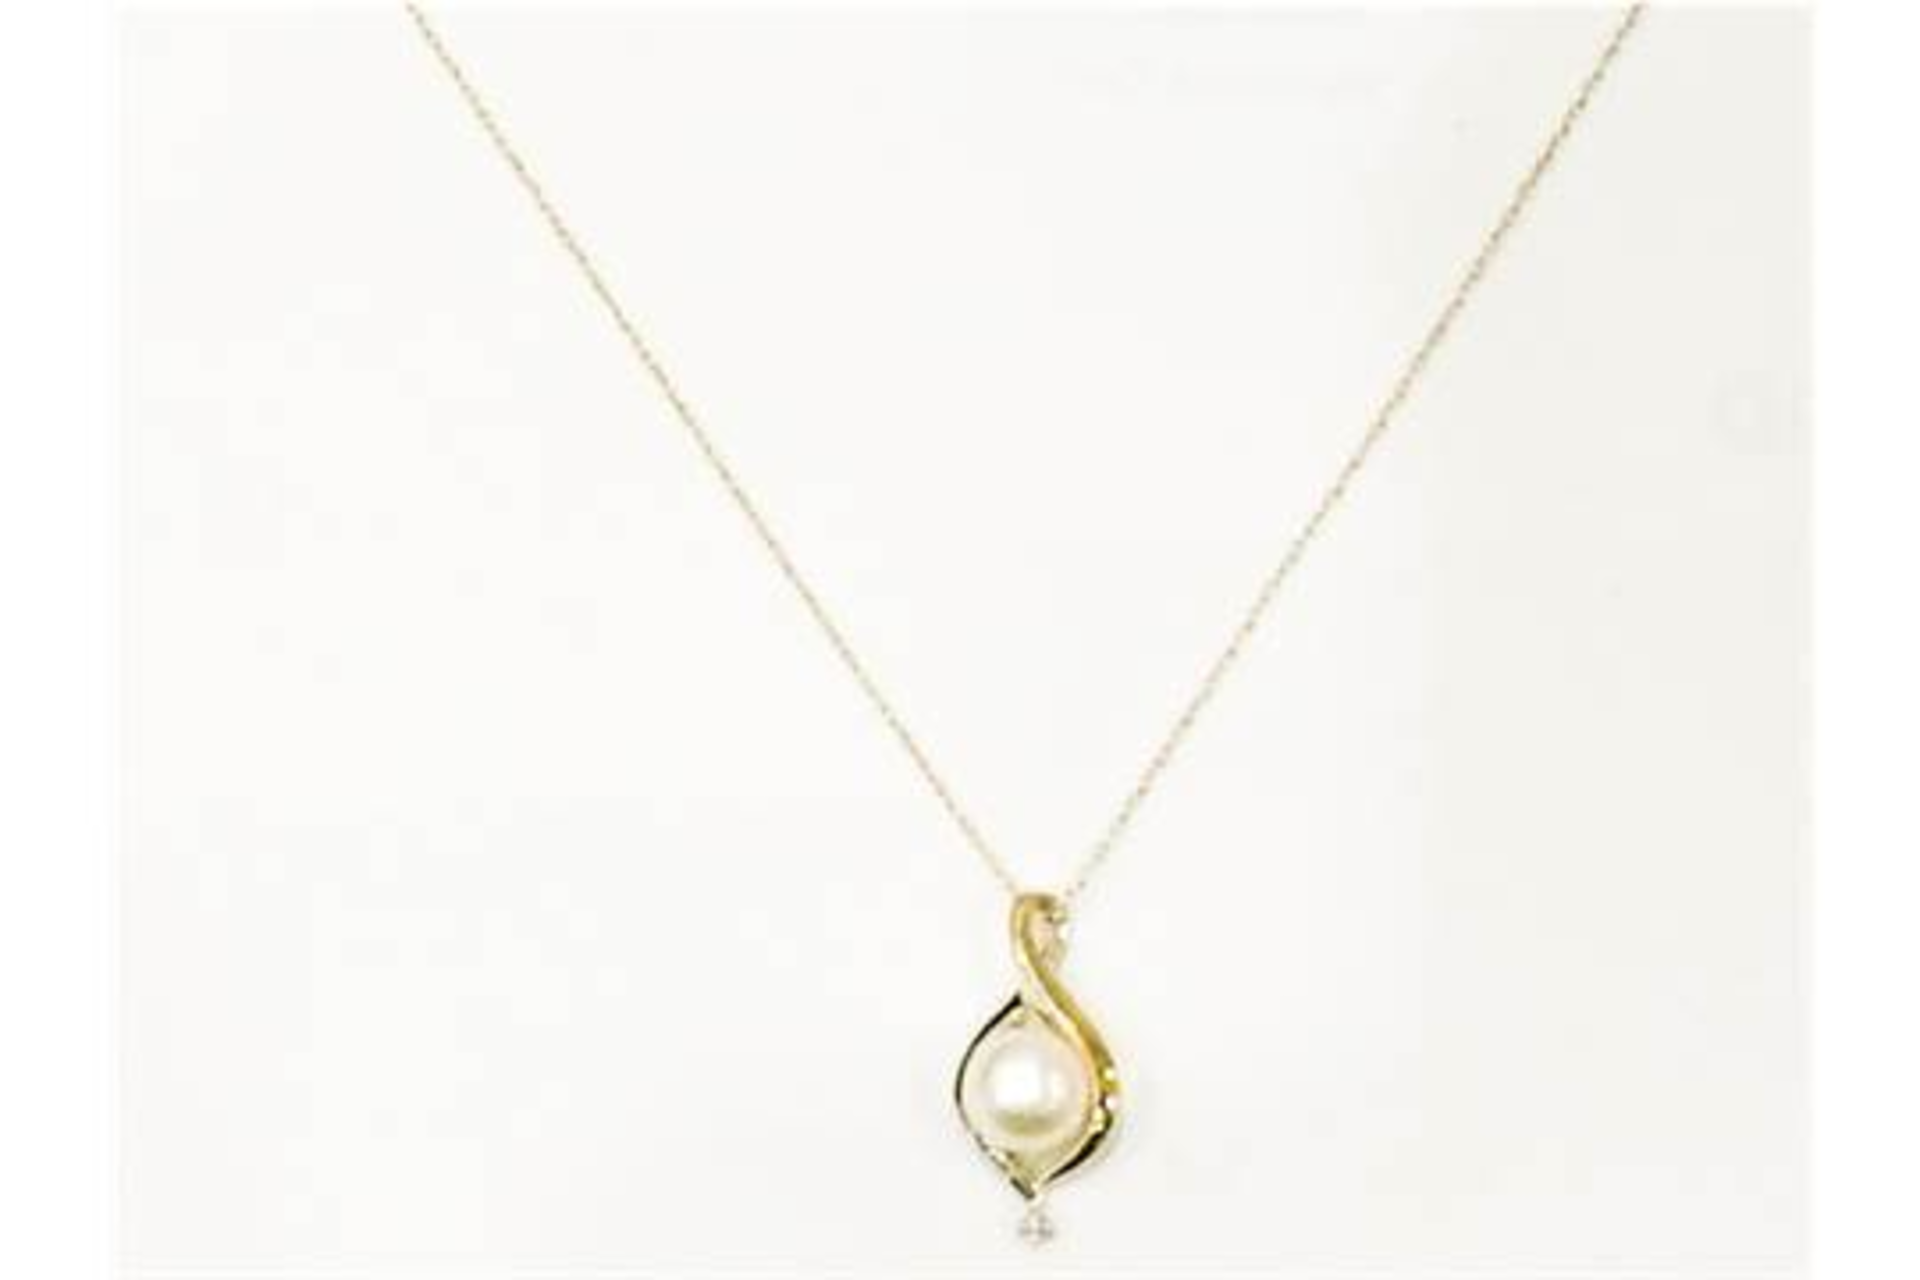 BRAND NEW 9CT YELLOW GOLD/WHITE GOLD PENDENT SET WITH A FRESH WATER PEARL AND DIAMOND, 9CT YELLOW